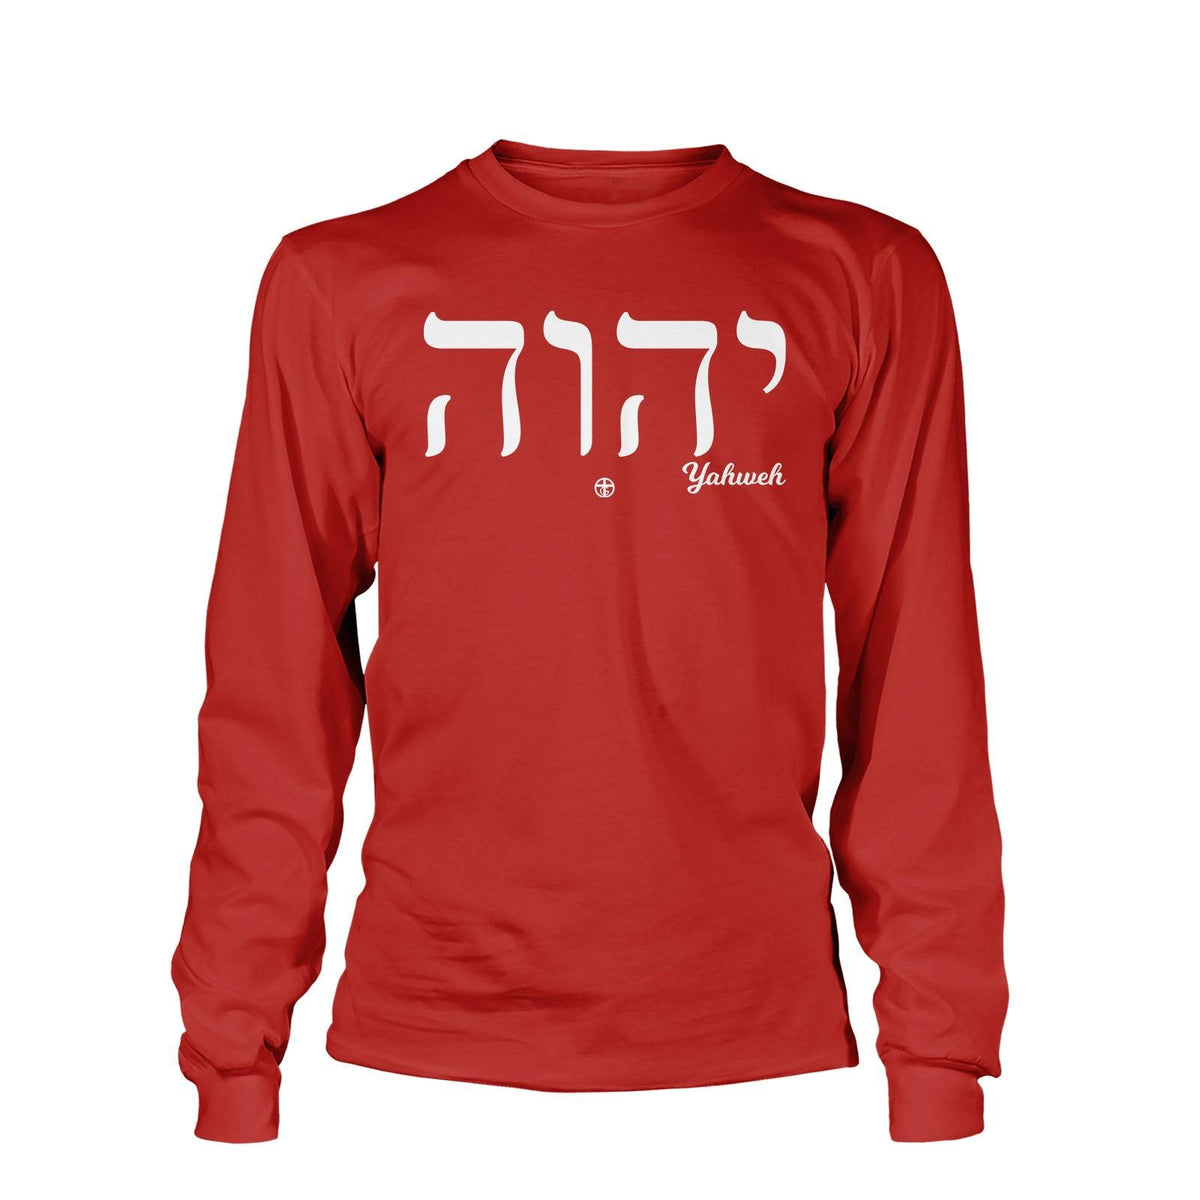 Yahweh Long Sleeves - Our True God